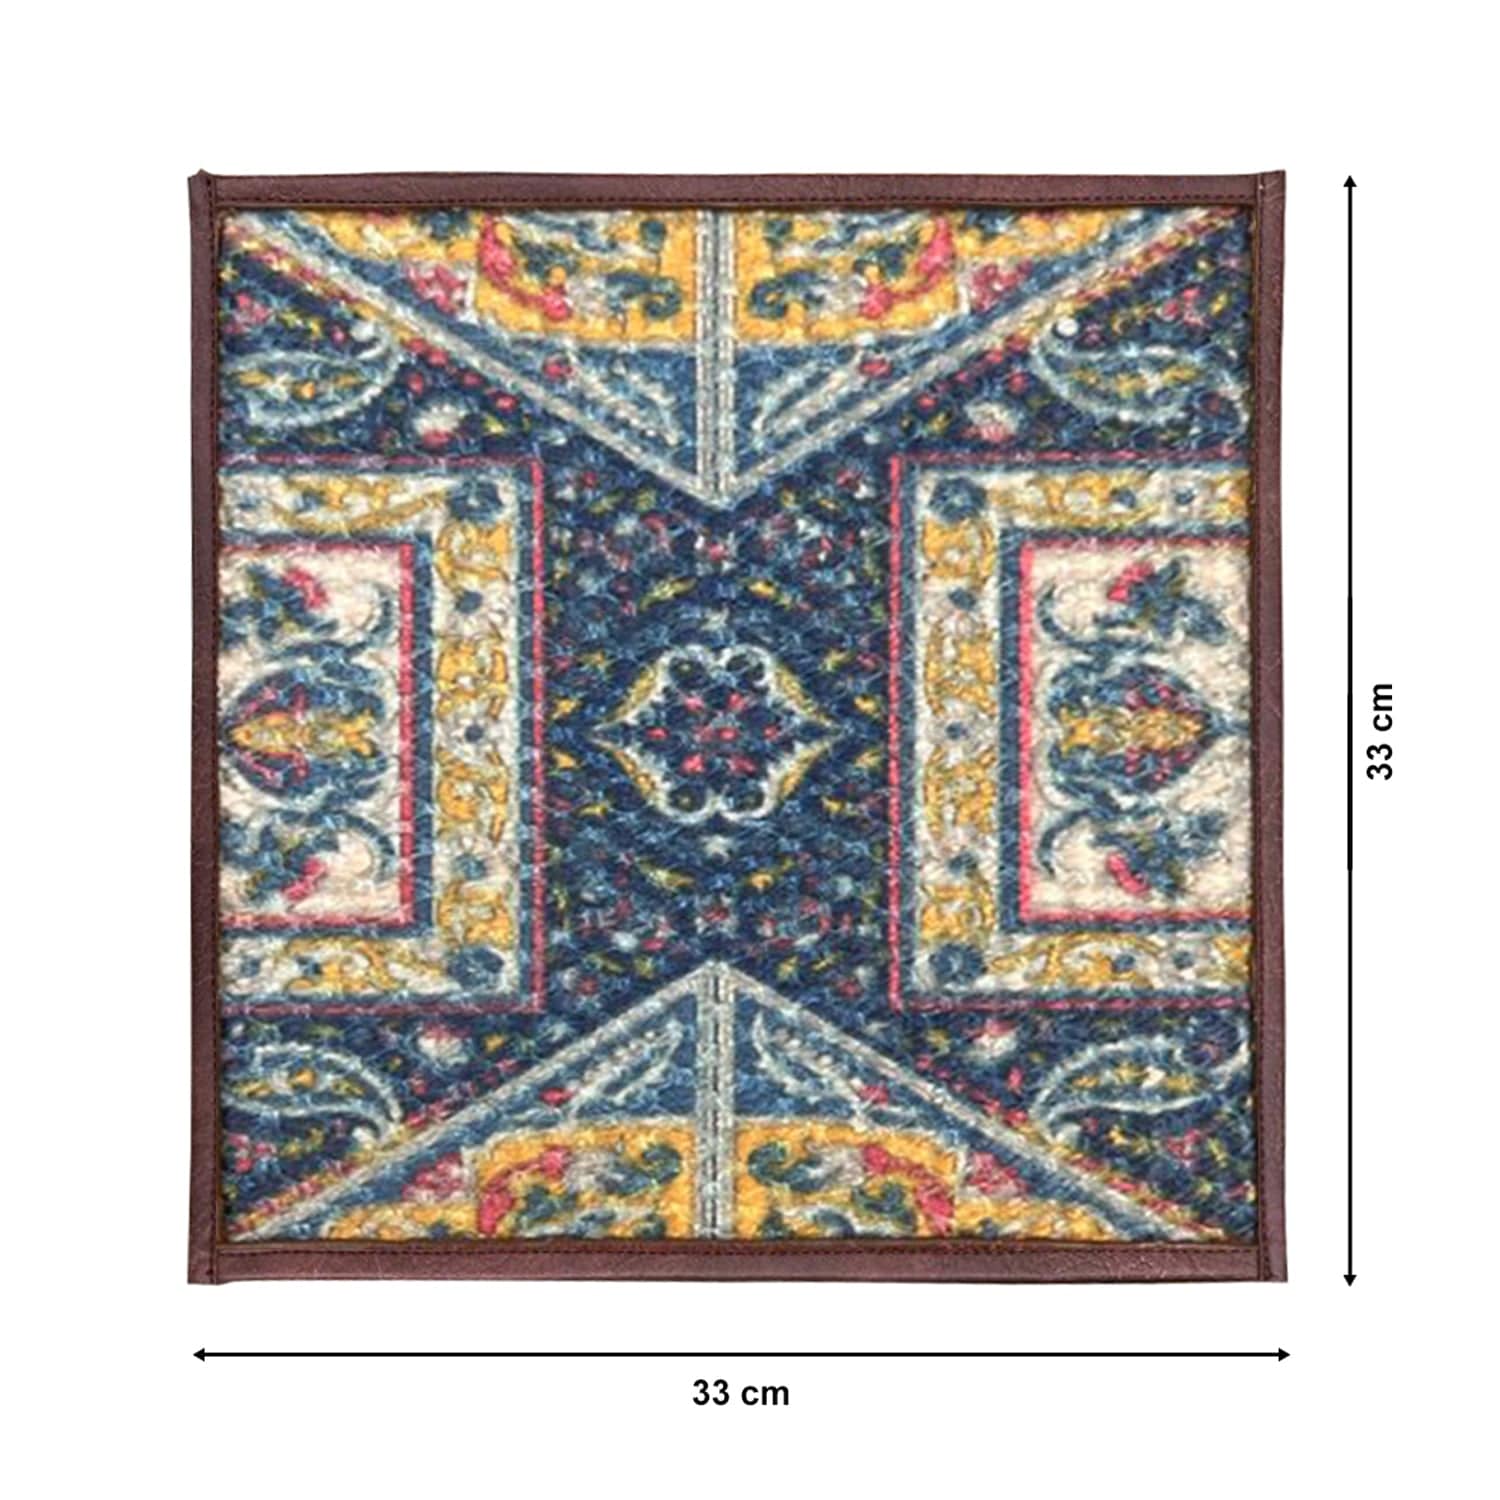 Mona B Set of 2 Printed Placemats, 13 INCH Square, Best for Bed-Side Table/Center Table, Dining Table/Shelves- PP-101 - Placemat by Mona-B - Backpack, Flat30, New Arrivals, Sale, Shop1999, Shop2999, Shop3999